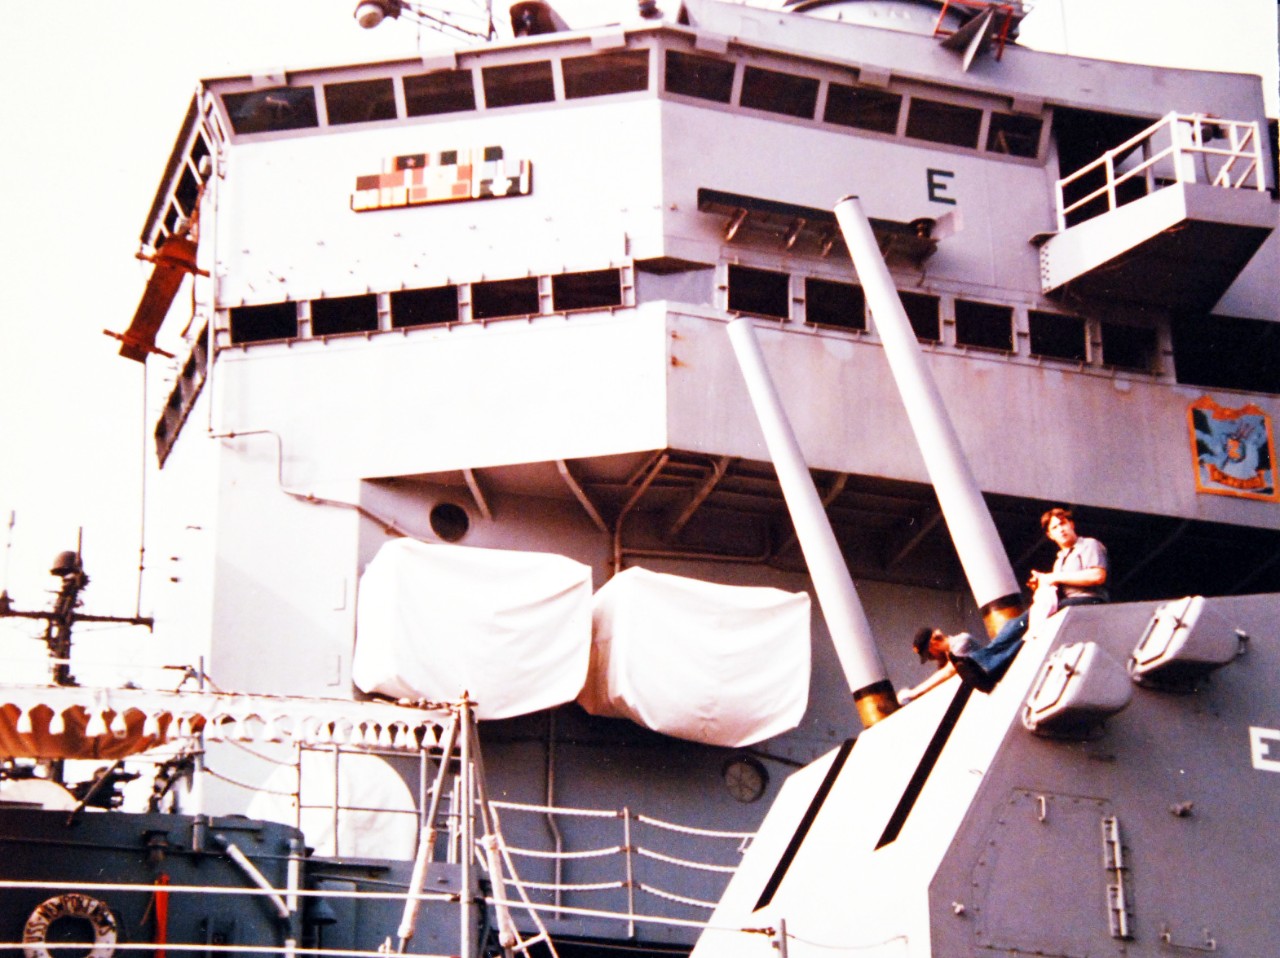 428-GX-K-105158:   USS Newport News (CA-148), 1974.  Crewmen of the heavy cruiser polish a 5”, 38 caliber twin gun while at Naval Air Station, Norfolk, Virginia.  Photographed by PH3 Gary L. Scott, August 26, 1974.         Official U.S. Navy Photograph, now in the collections of the National Archives.  (2017/10/25).  